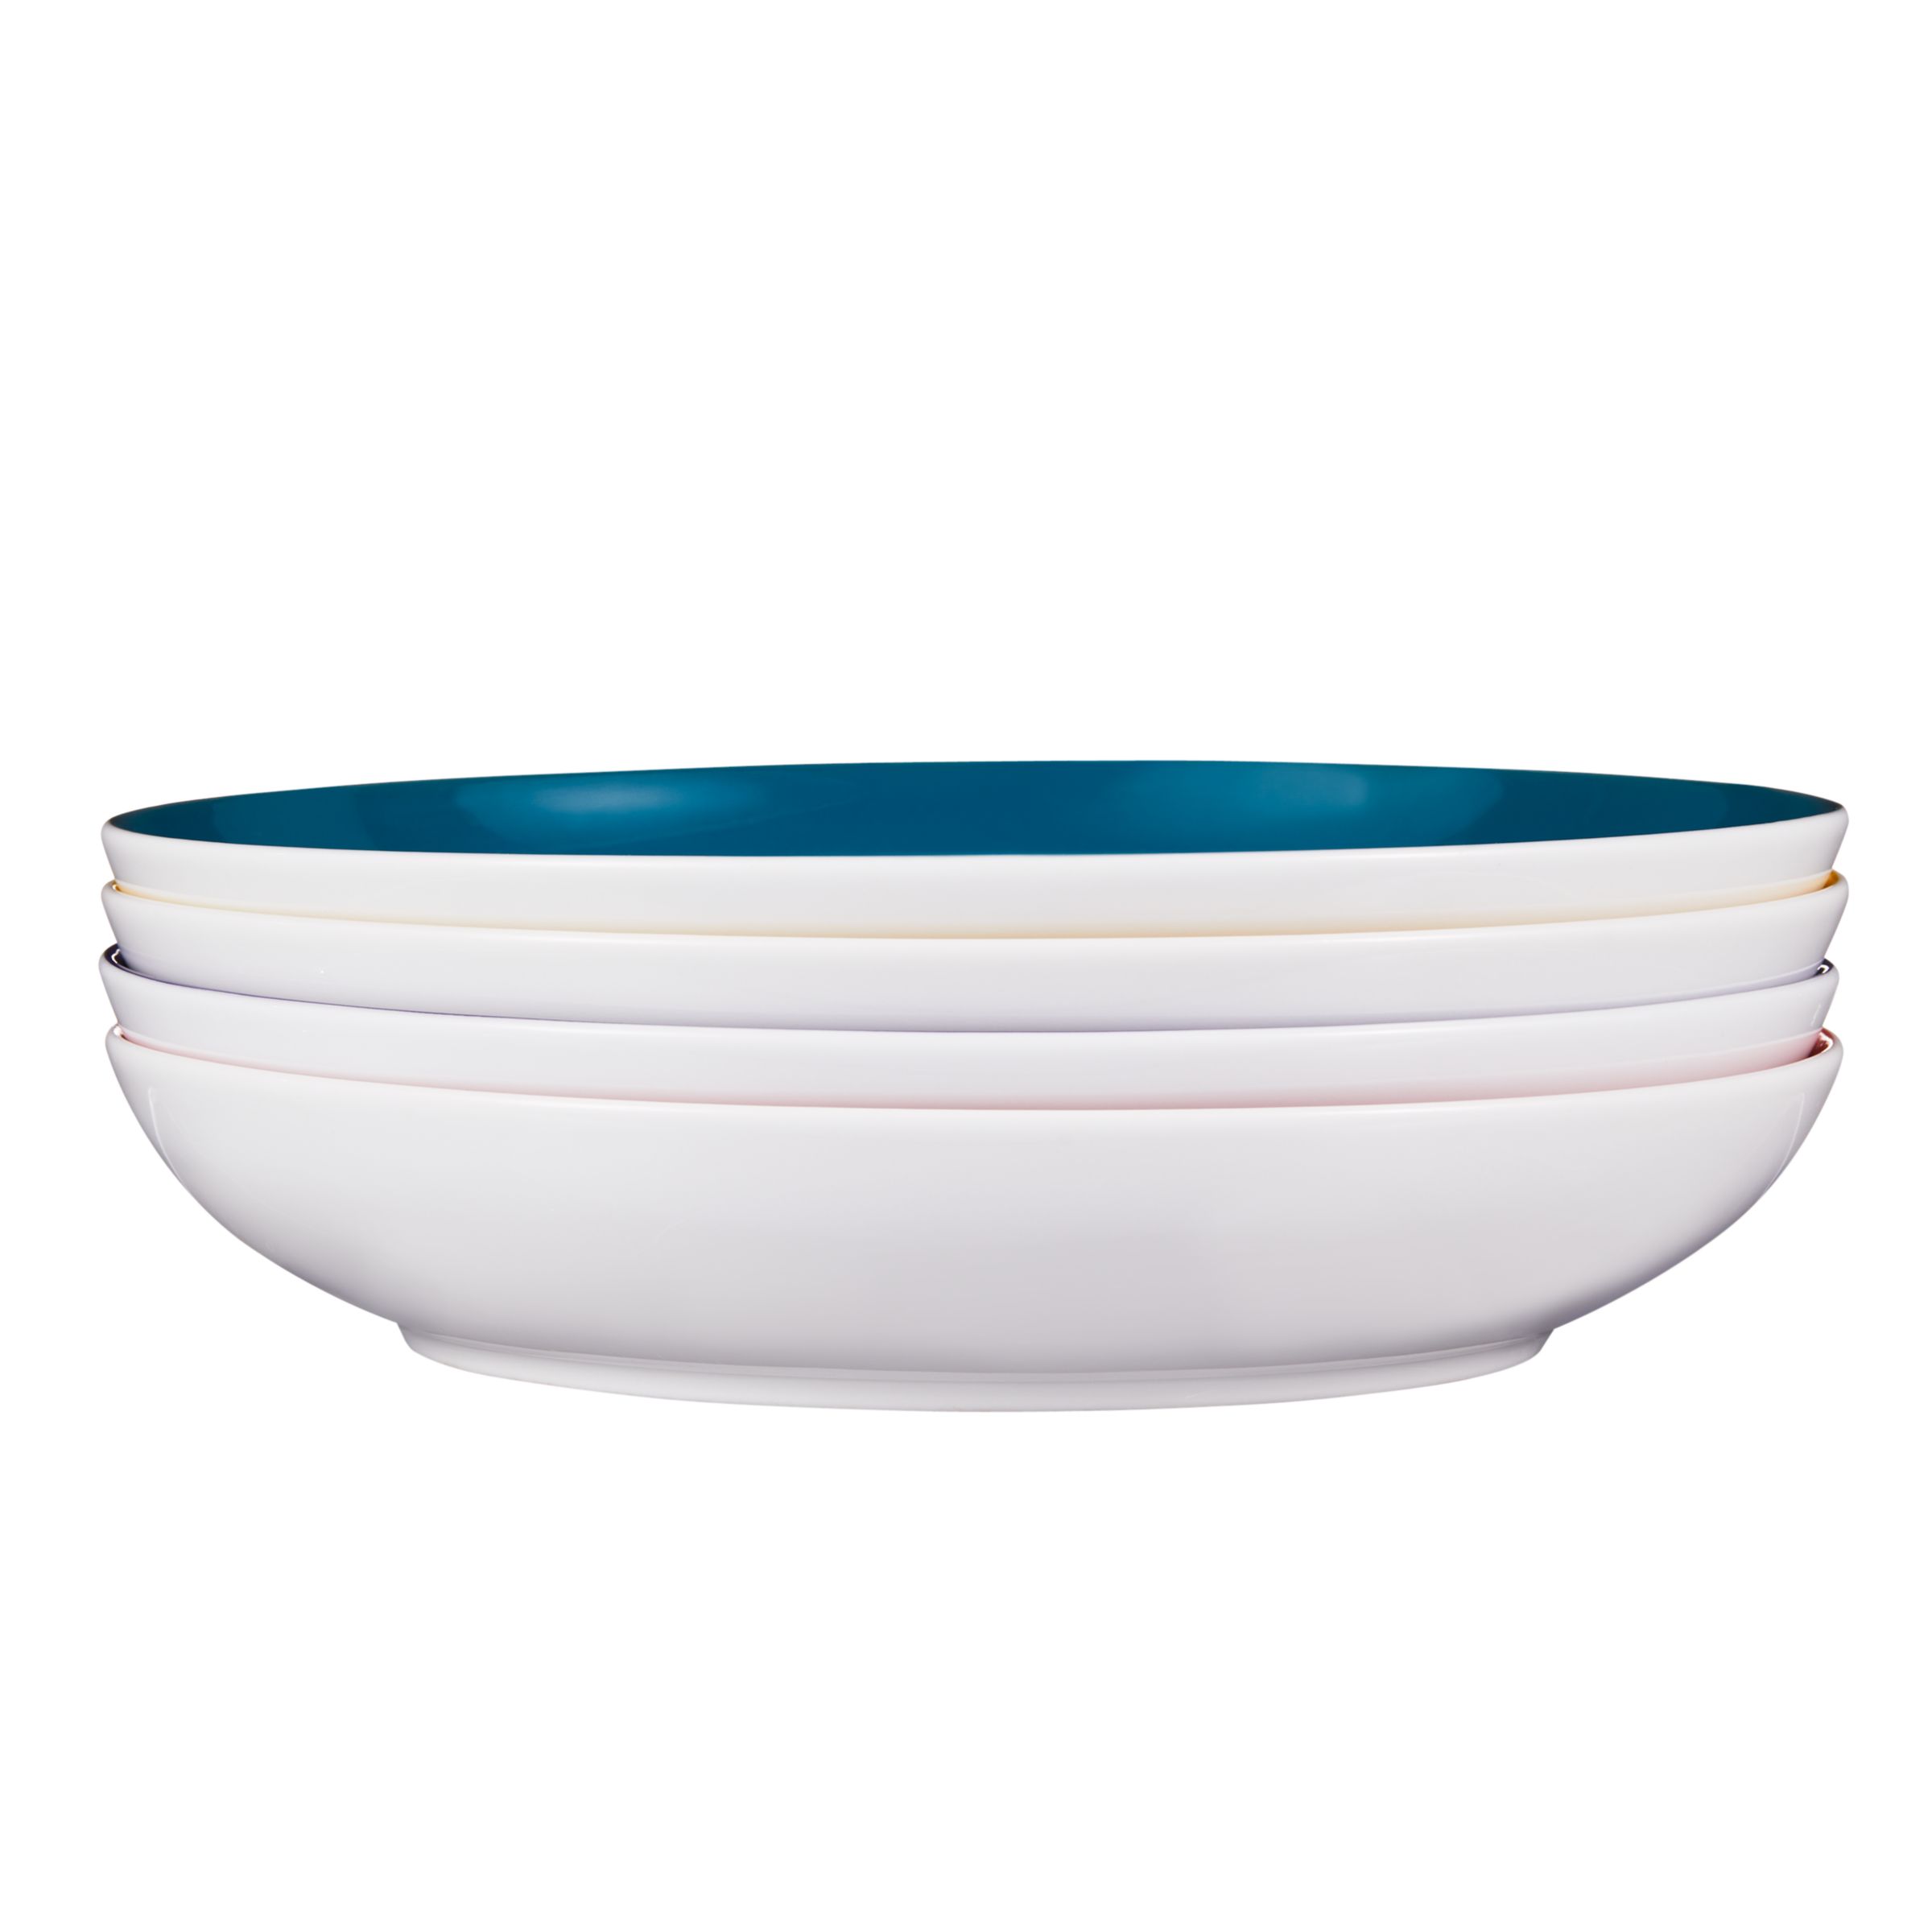 House by John Lewis Colour Band Pasta Bowls, Set of 4, Dia.25cm, Assorted